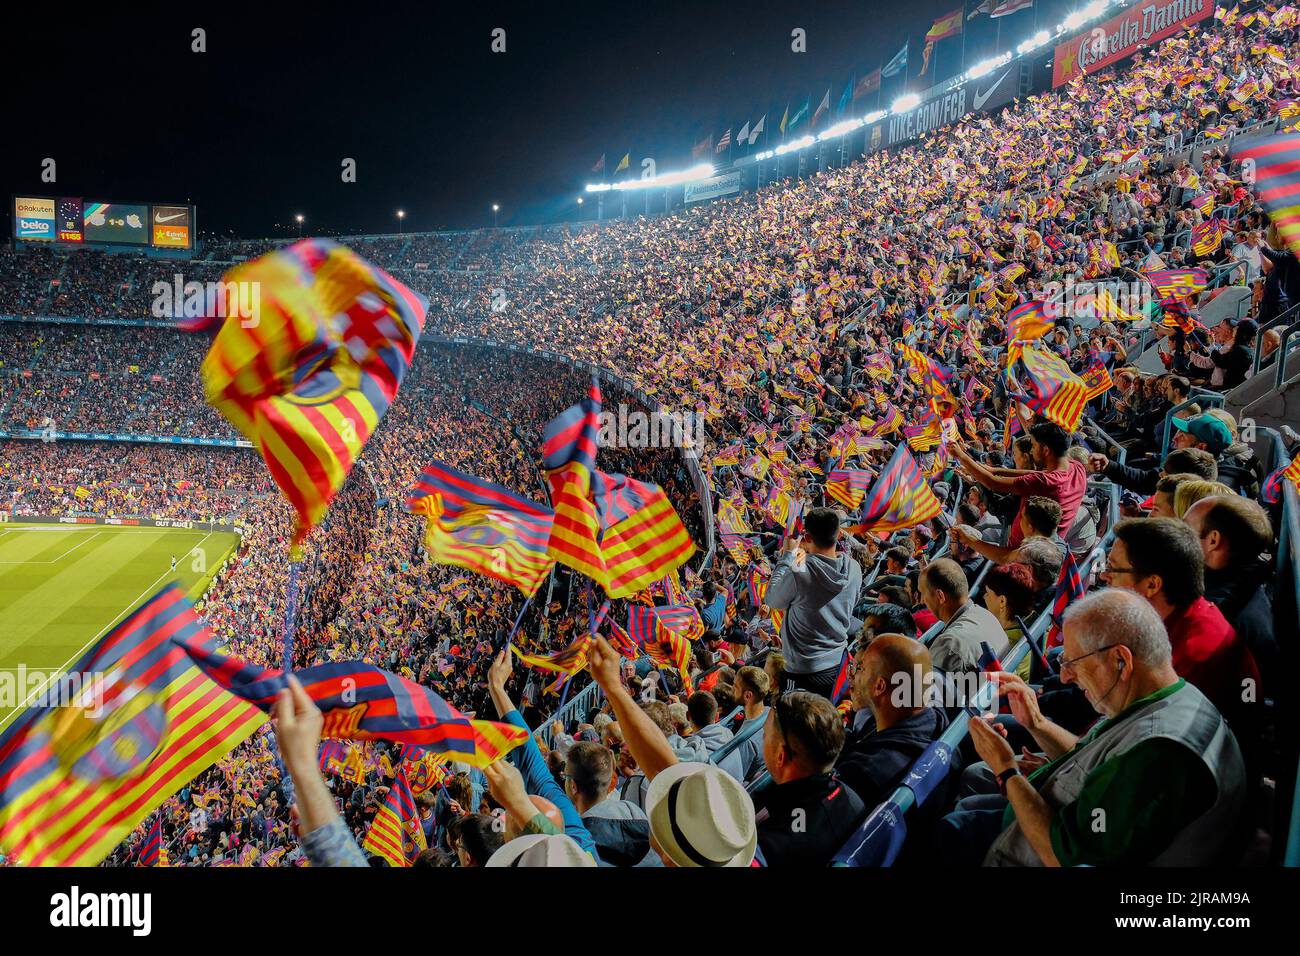 BARCELONA, SPAIN -MAY 20, 2018: The finals of the Spanish Cup. Match between Barcelona and Real Sociedad football clubs at the stadium Camp Nou Stock Photo